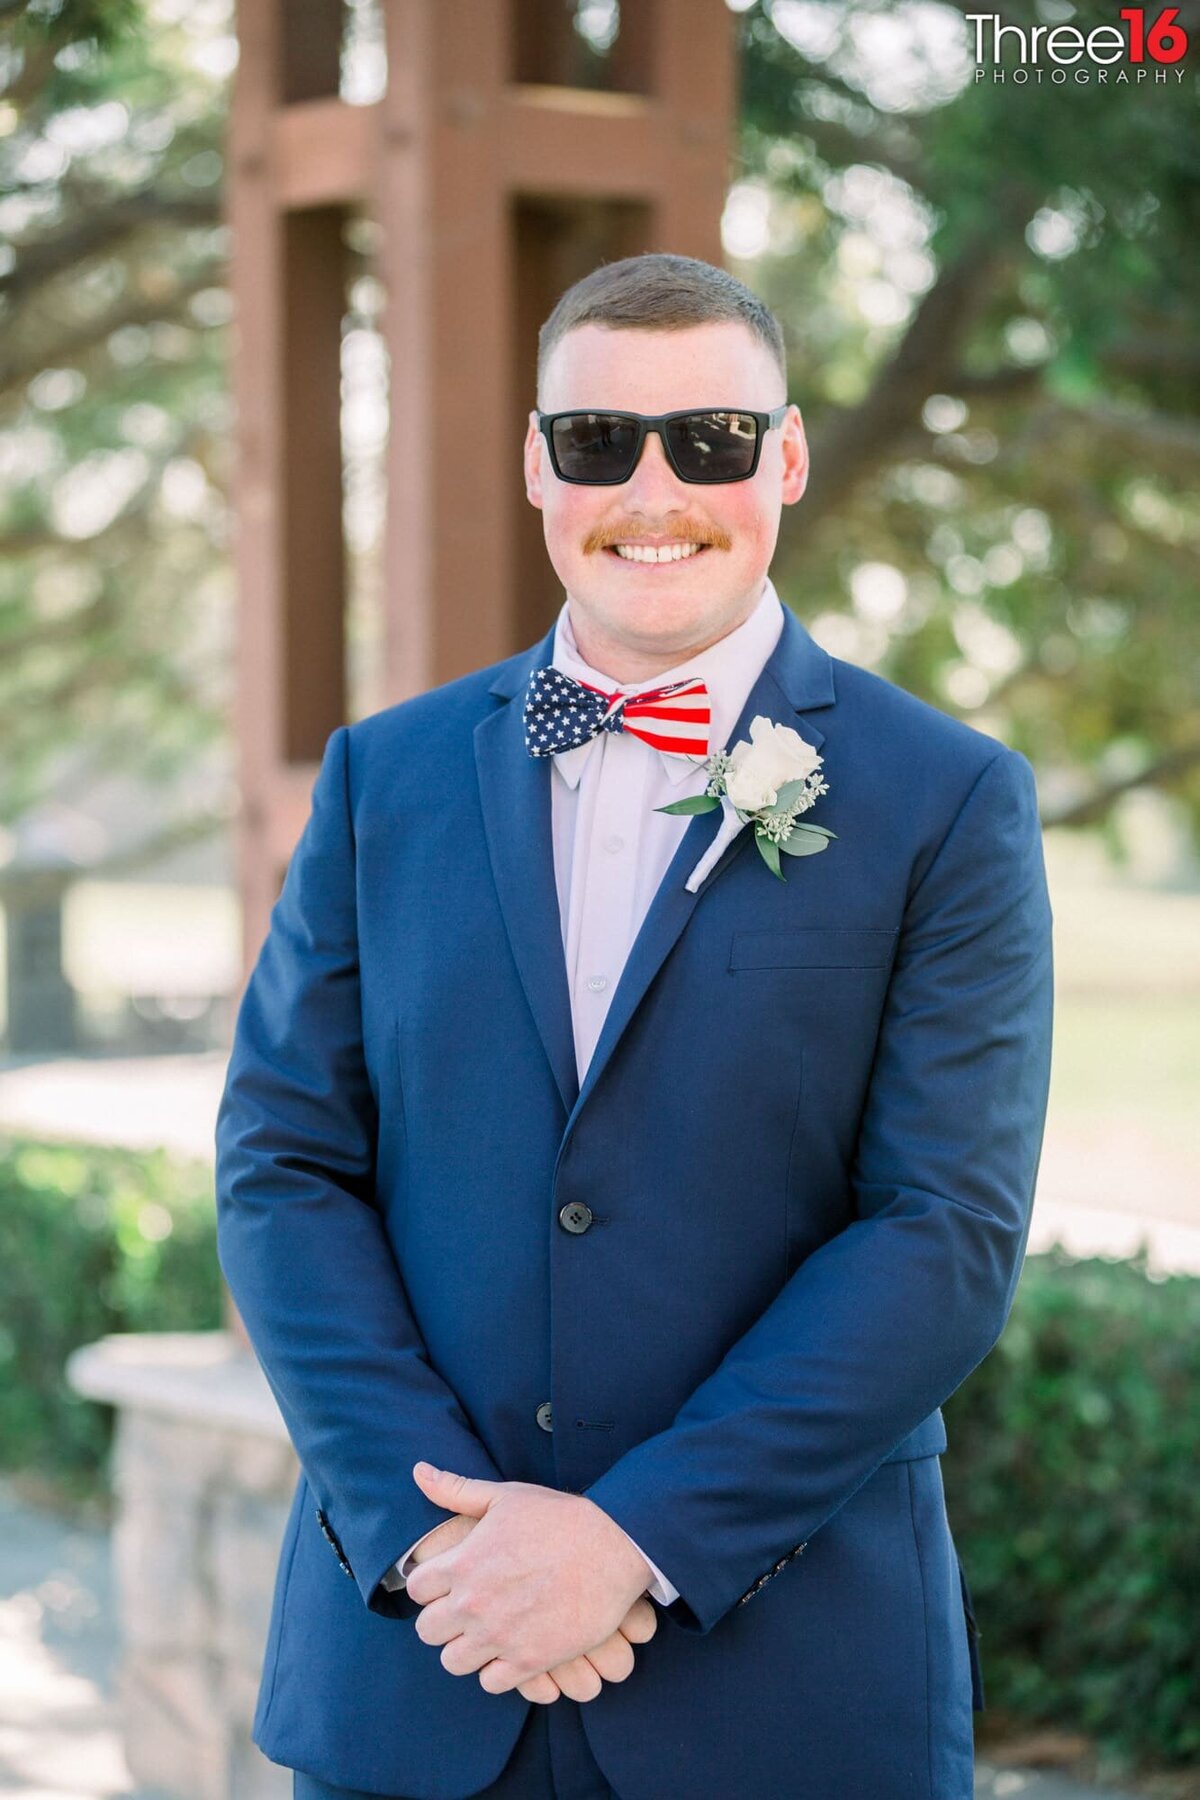 Groom poses with large smile, hands crossed and sunglasses on